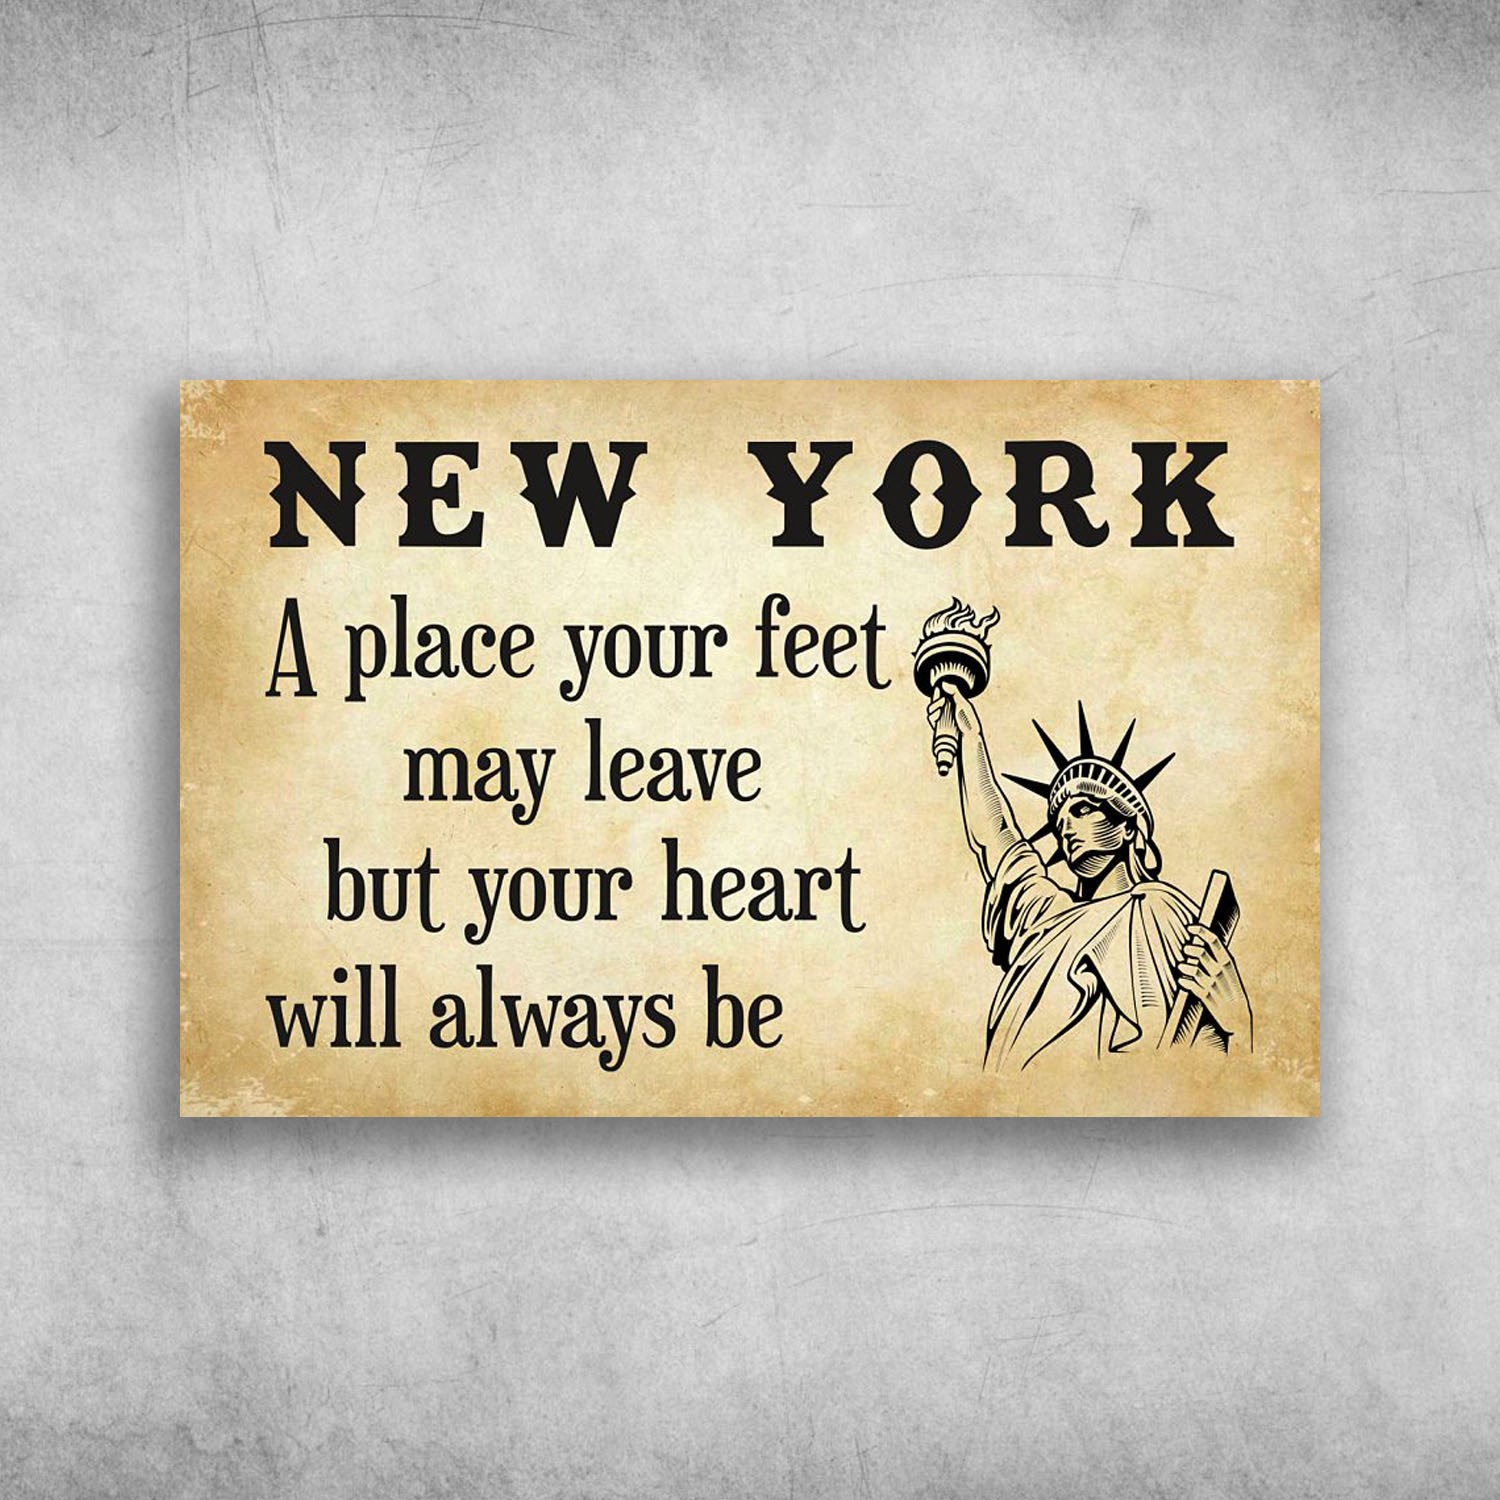 New York A Place Your Feet May Leave